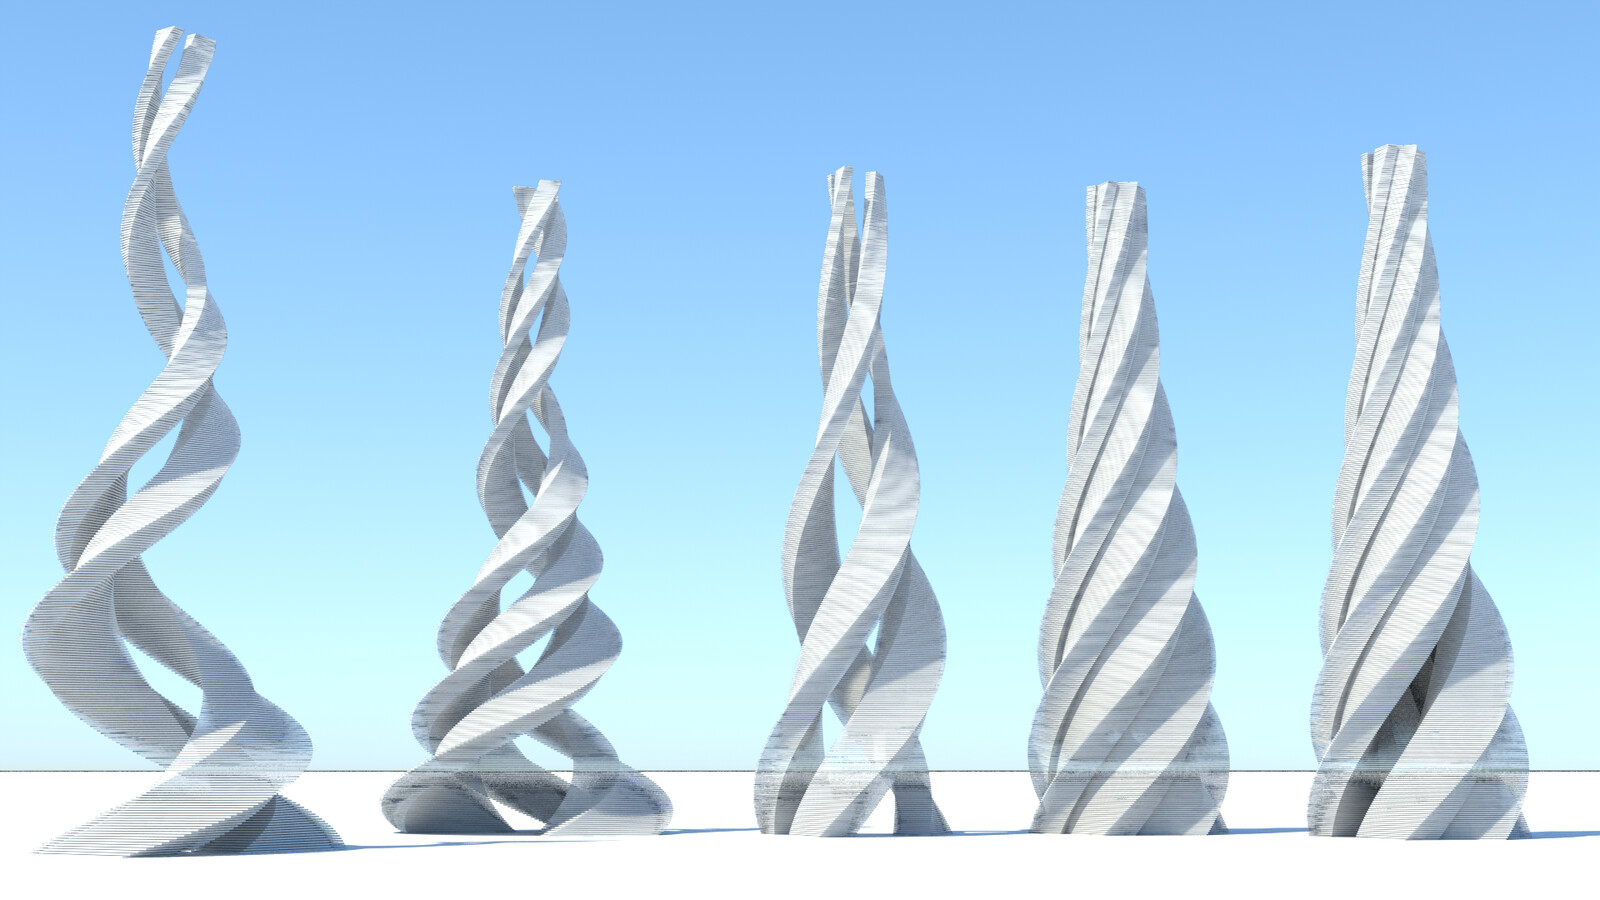 Procedurally-generated spiral towers - elevation view